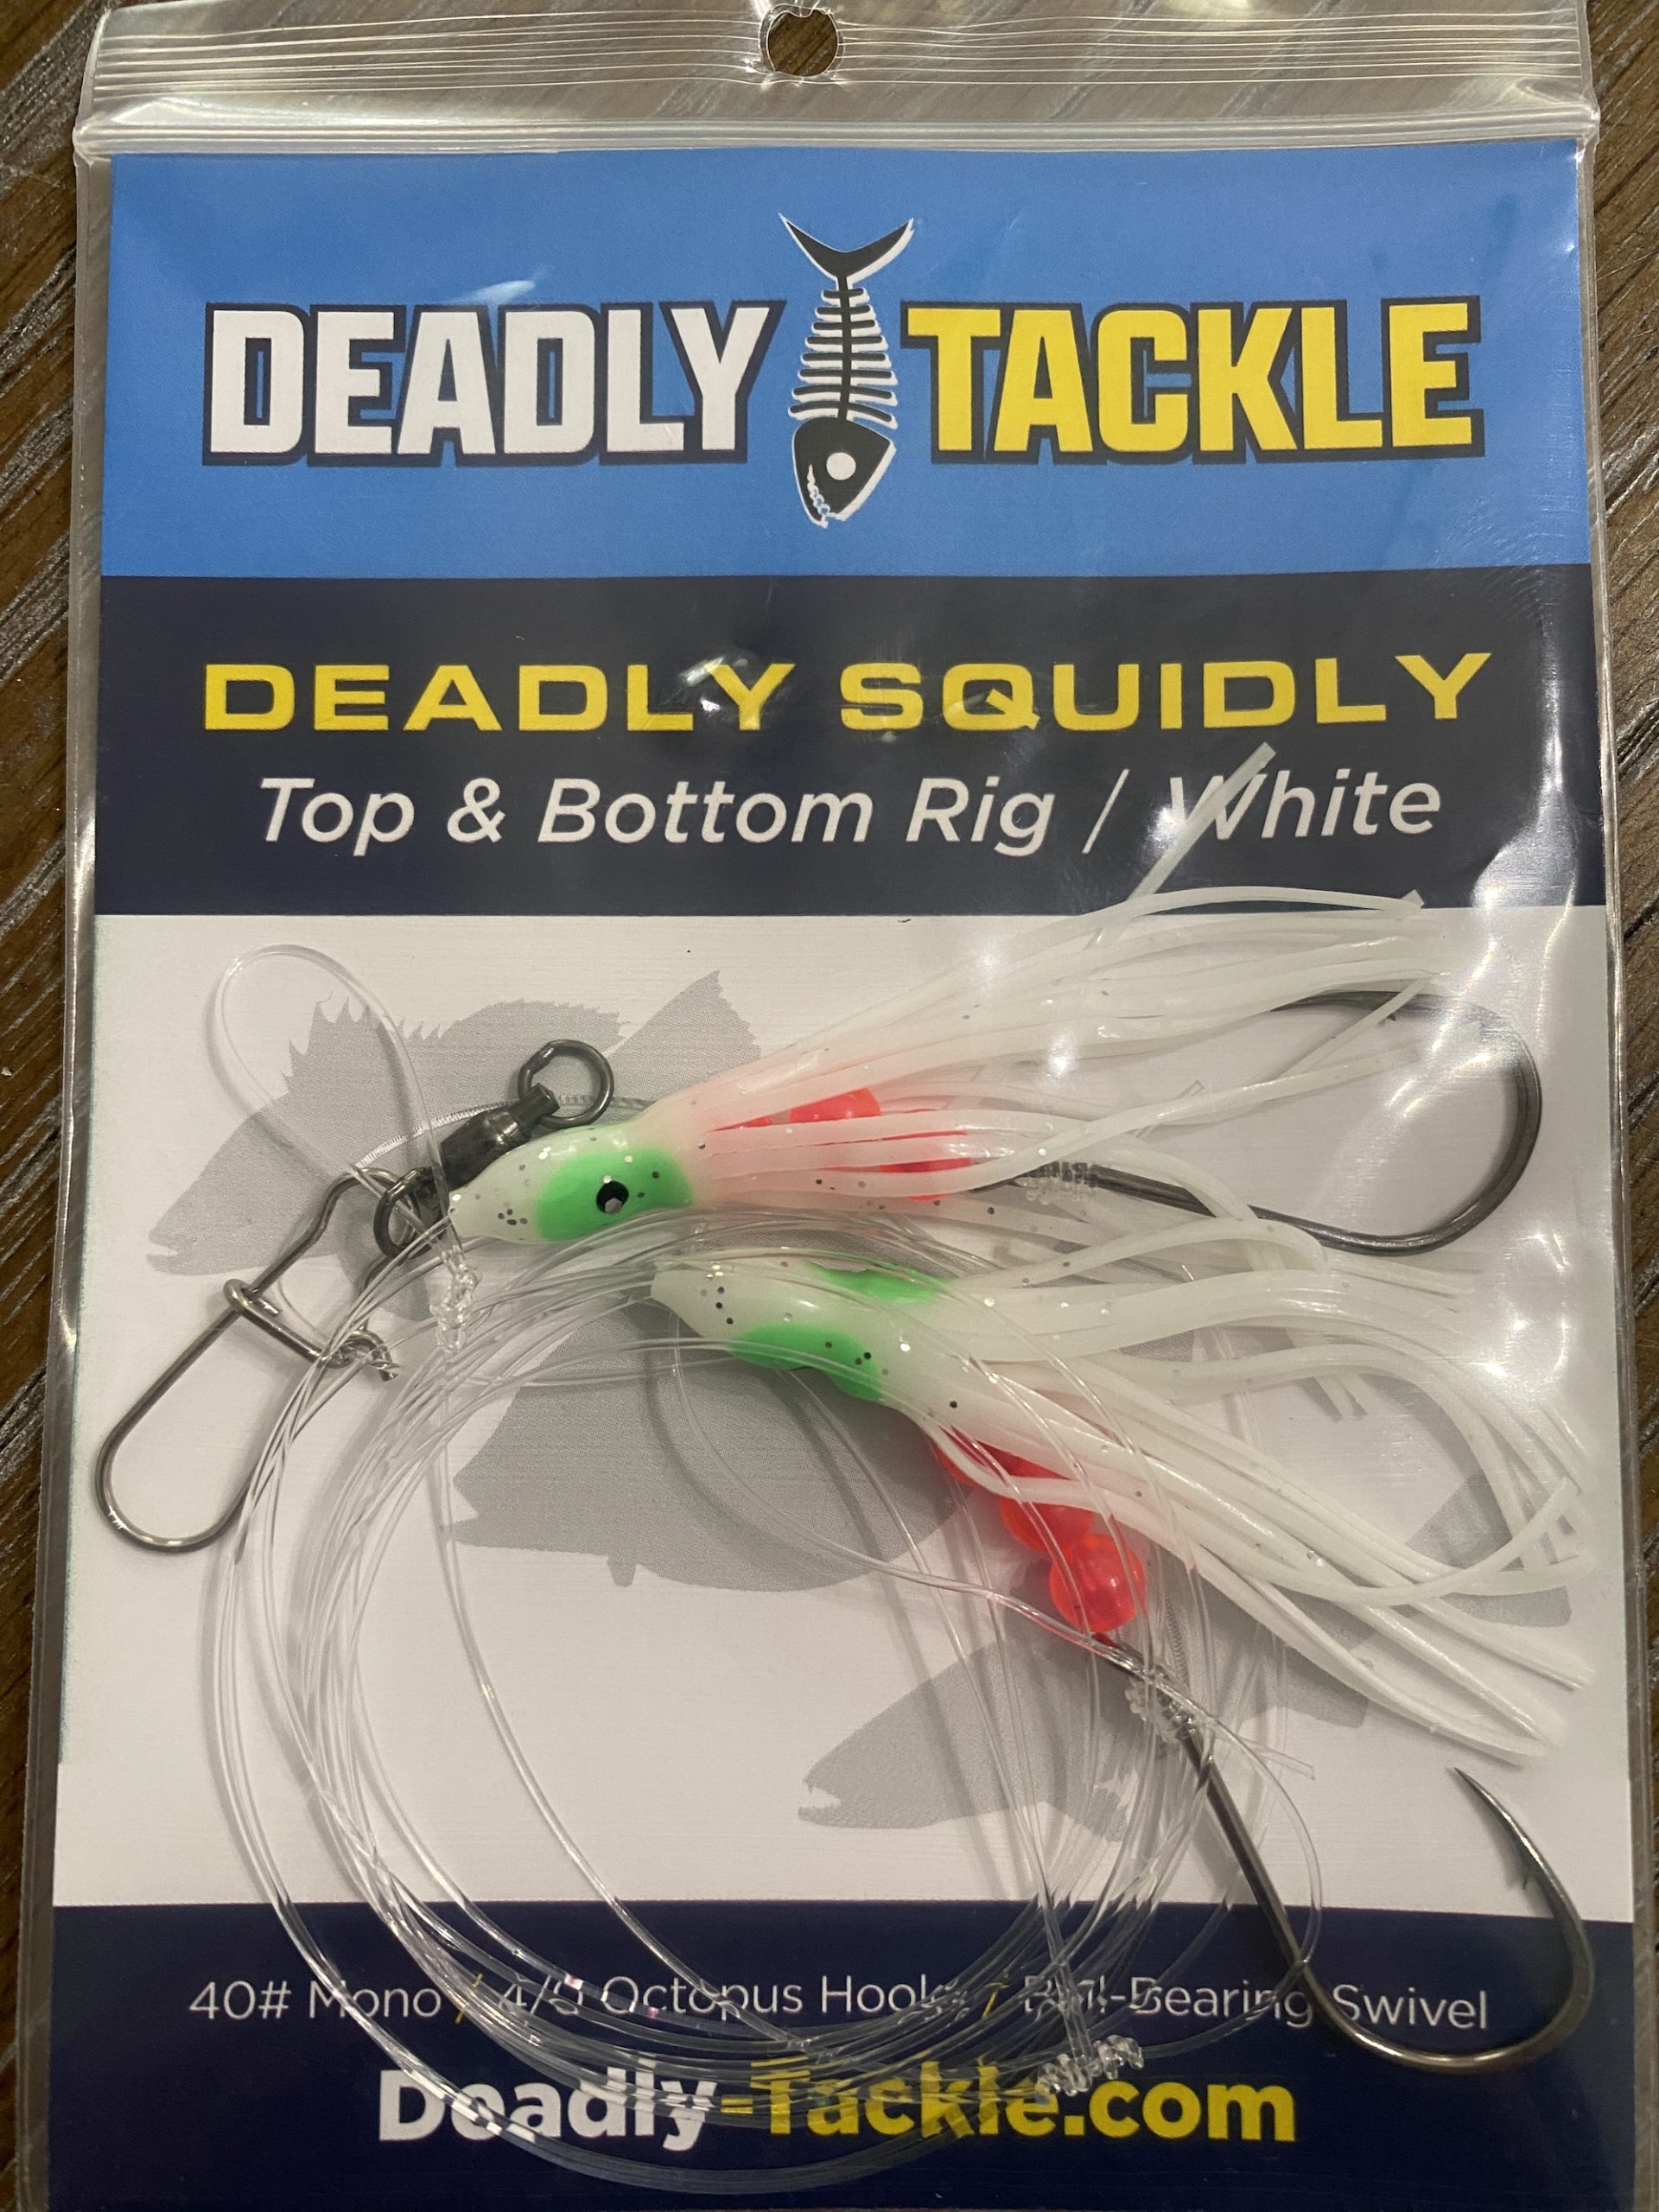 Deadly Tackle White Squidly - Fishing Reports & News Ocean City MD  Tournaments